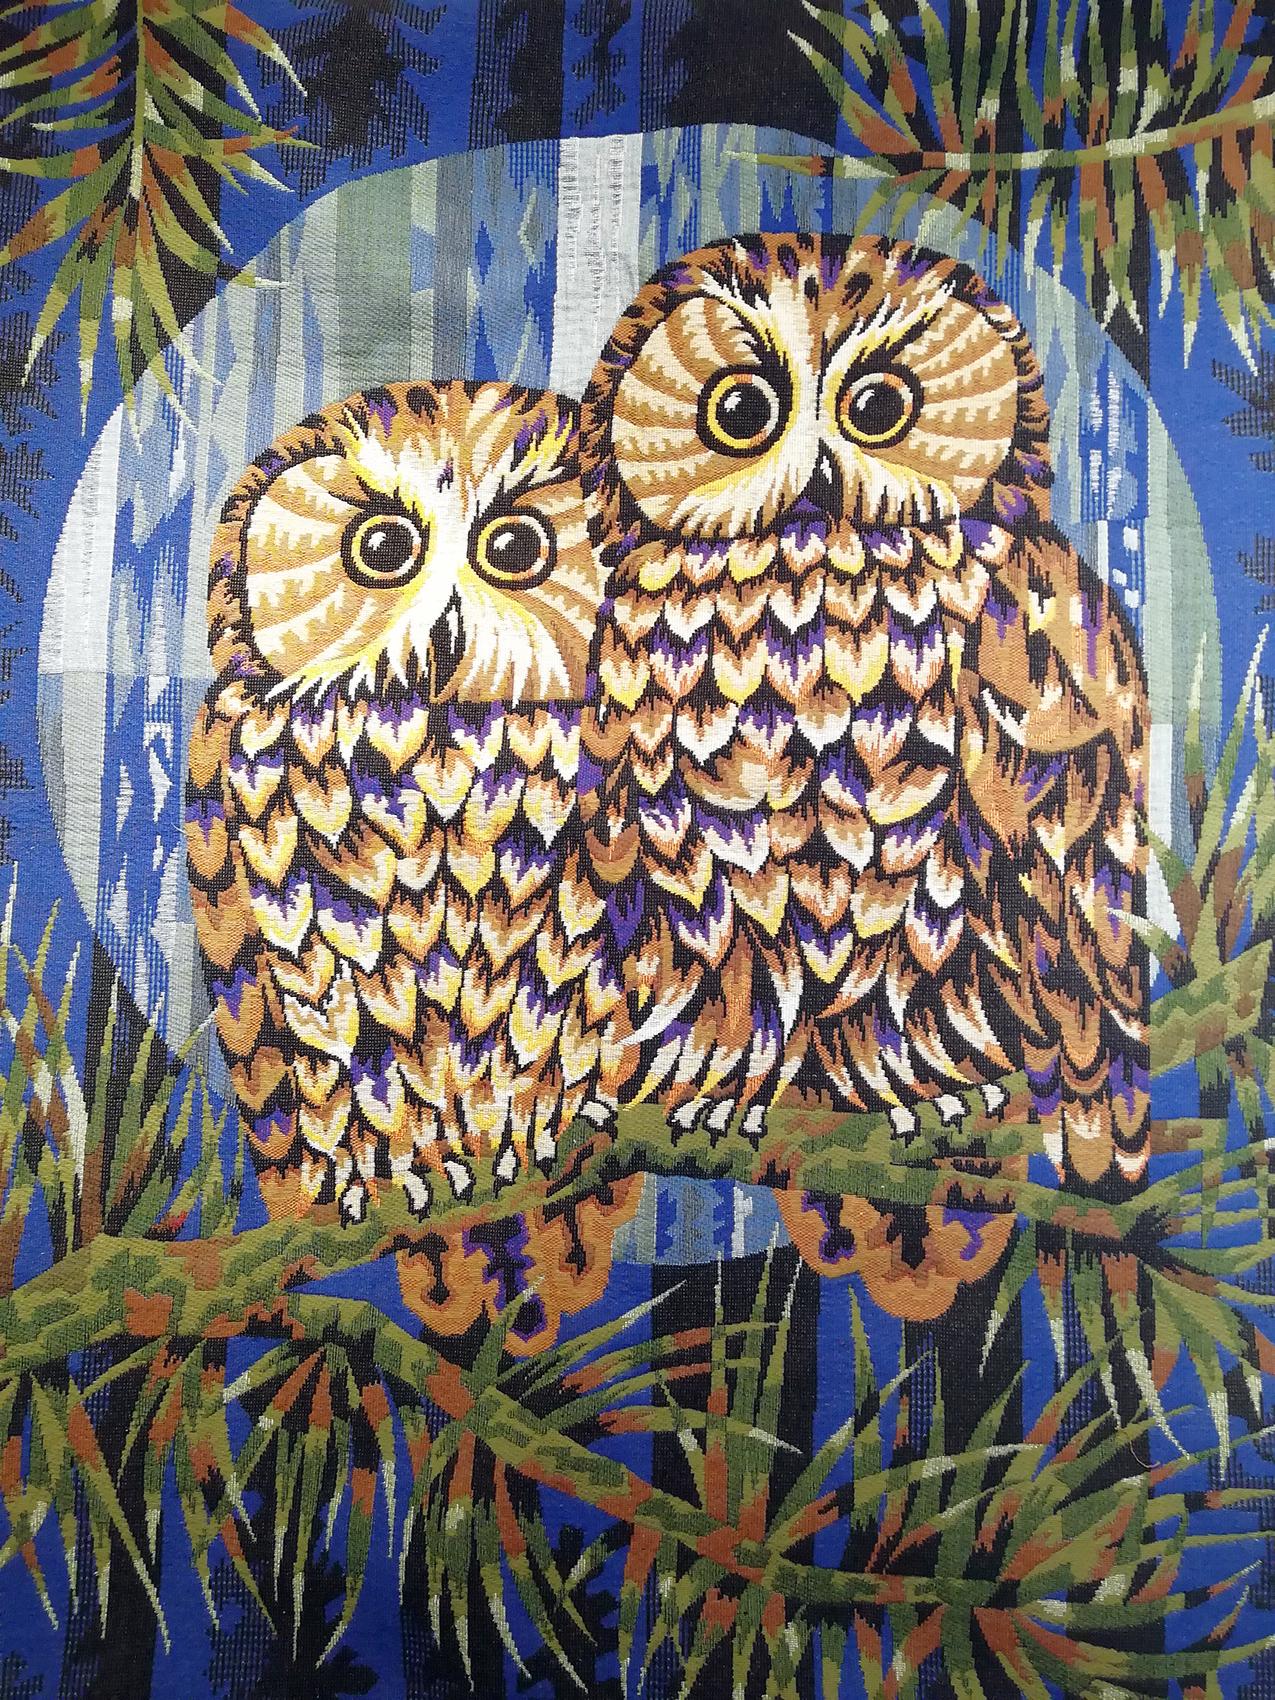 Midcentury wall tapestry by Alain Cornic.
Entitled “Two owls”.
Showcases a landscape scene of “two owls” motif vertical design with shades of blue and brown colors.
Made of woven wool and have a bolduc on the reverse.